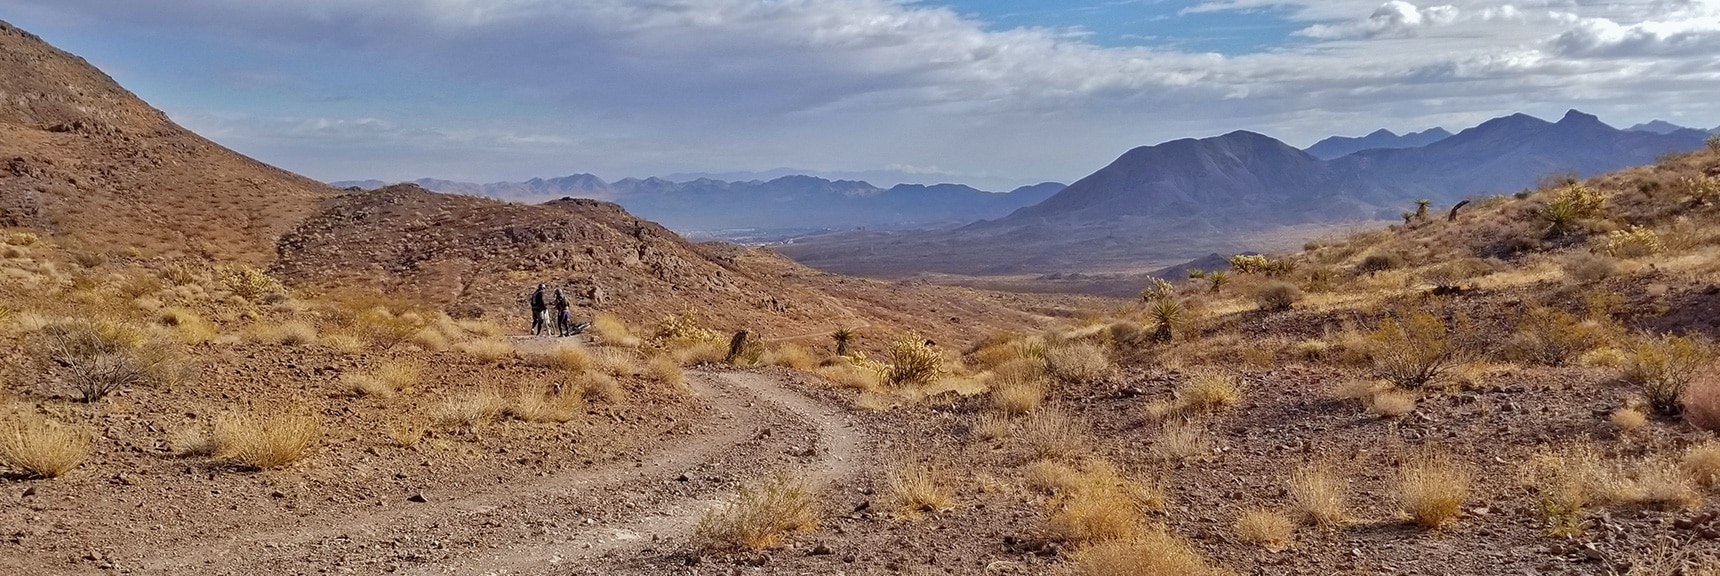 Looking Back Toward Henderson, the Lake Mead Area and Beyond | McCullough Hills Trail in Sloan Canyon National Conservation Area, Nevada